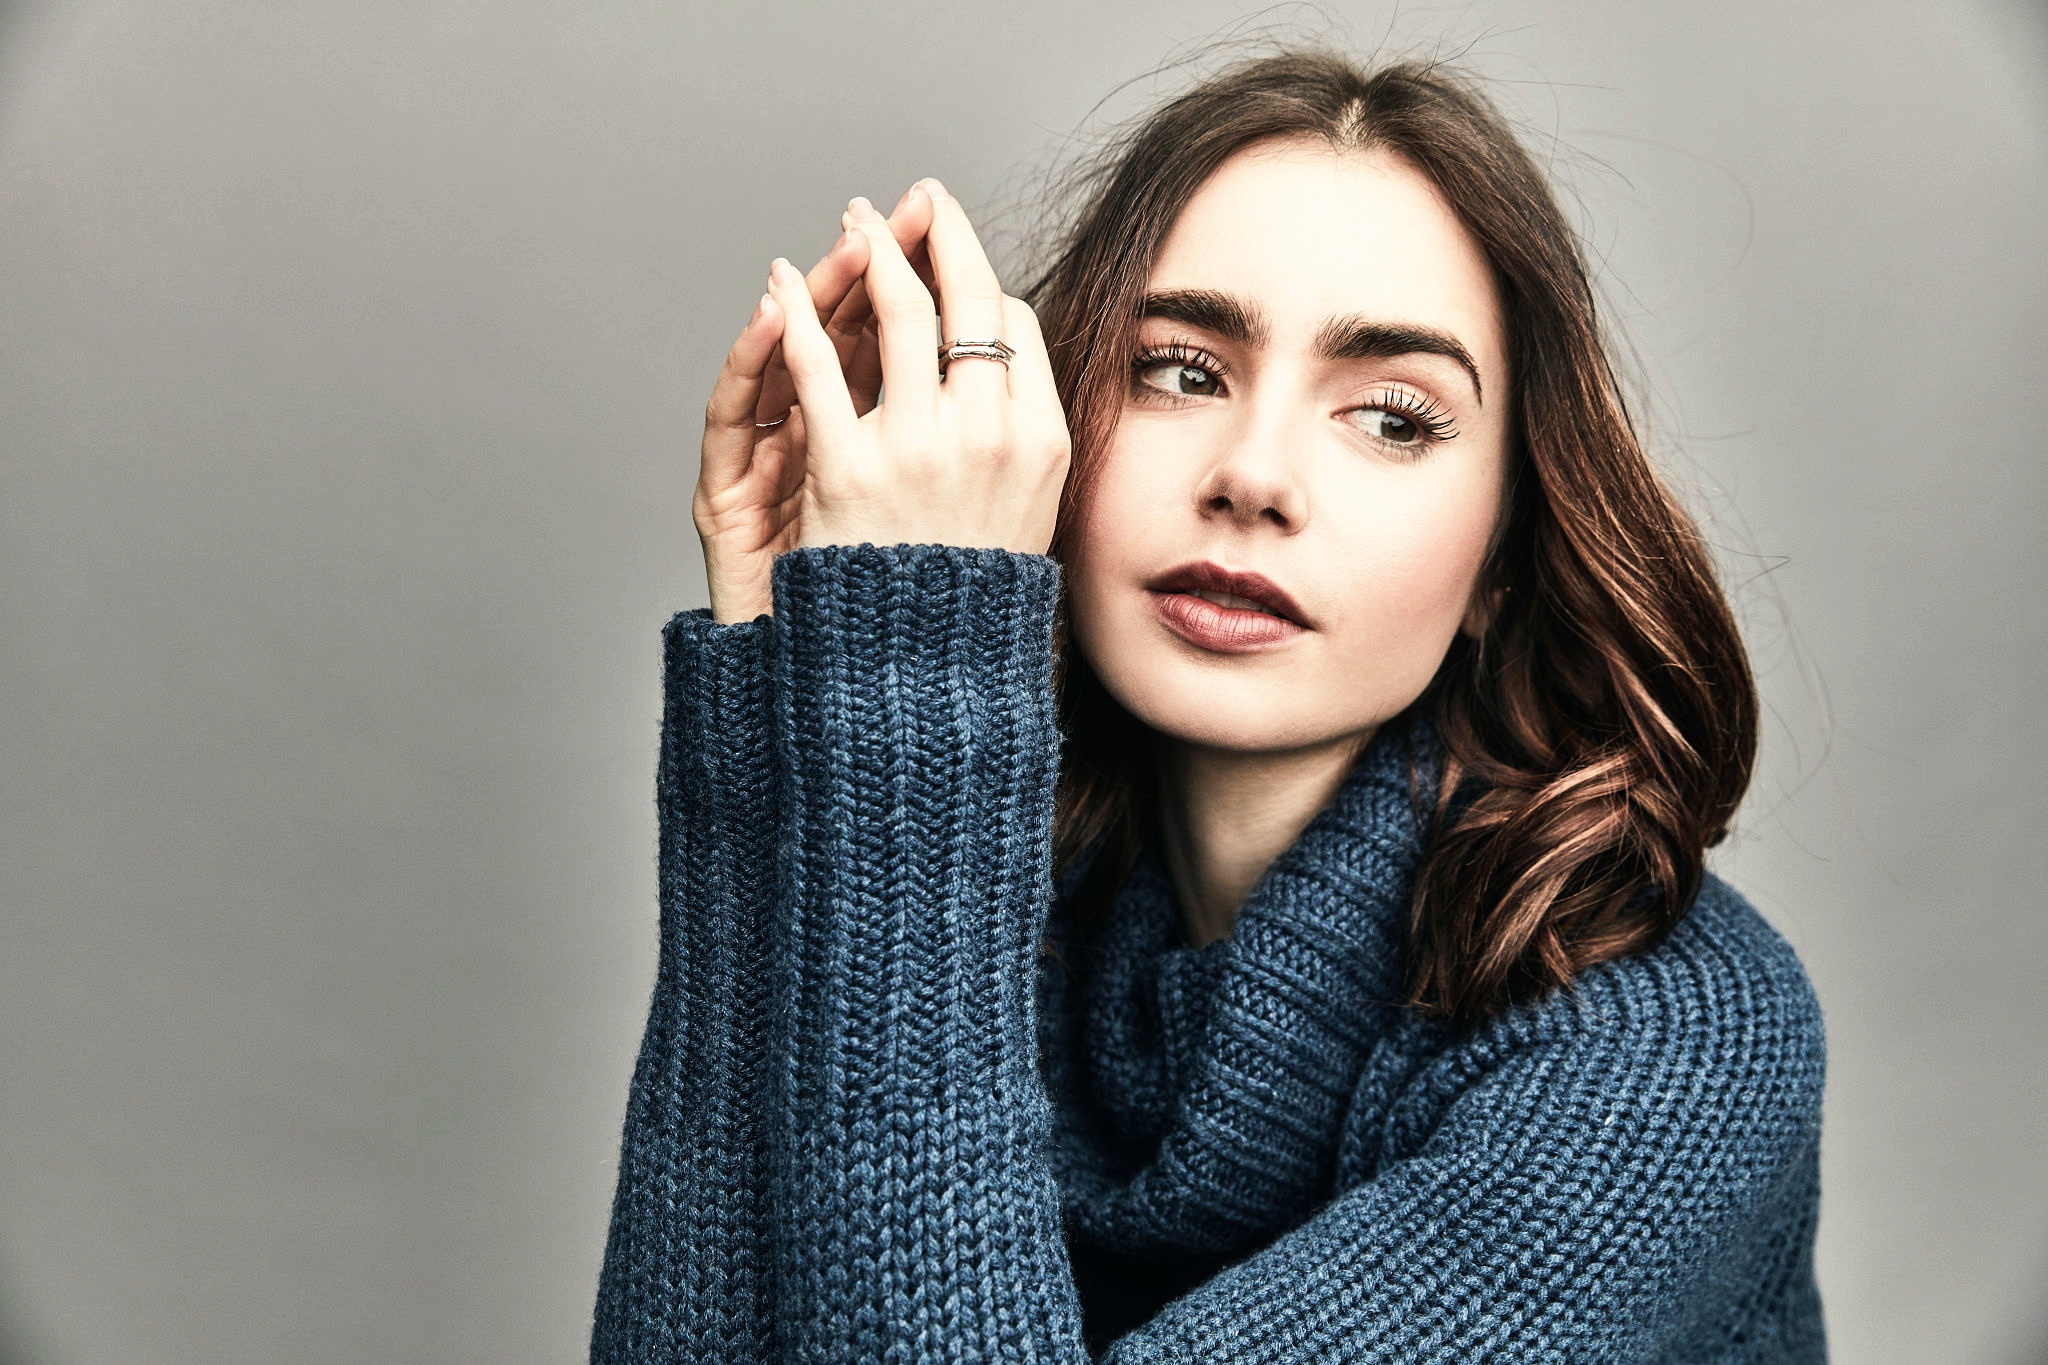 Women Sweater Brunette Eyebrows Long Eyelashes Pullover Young Woman 2048x1365